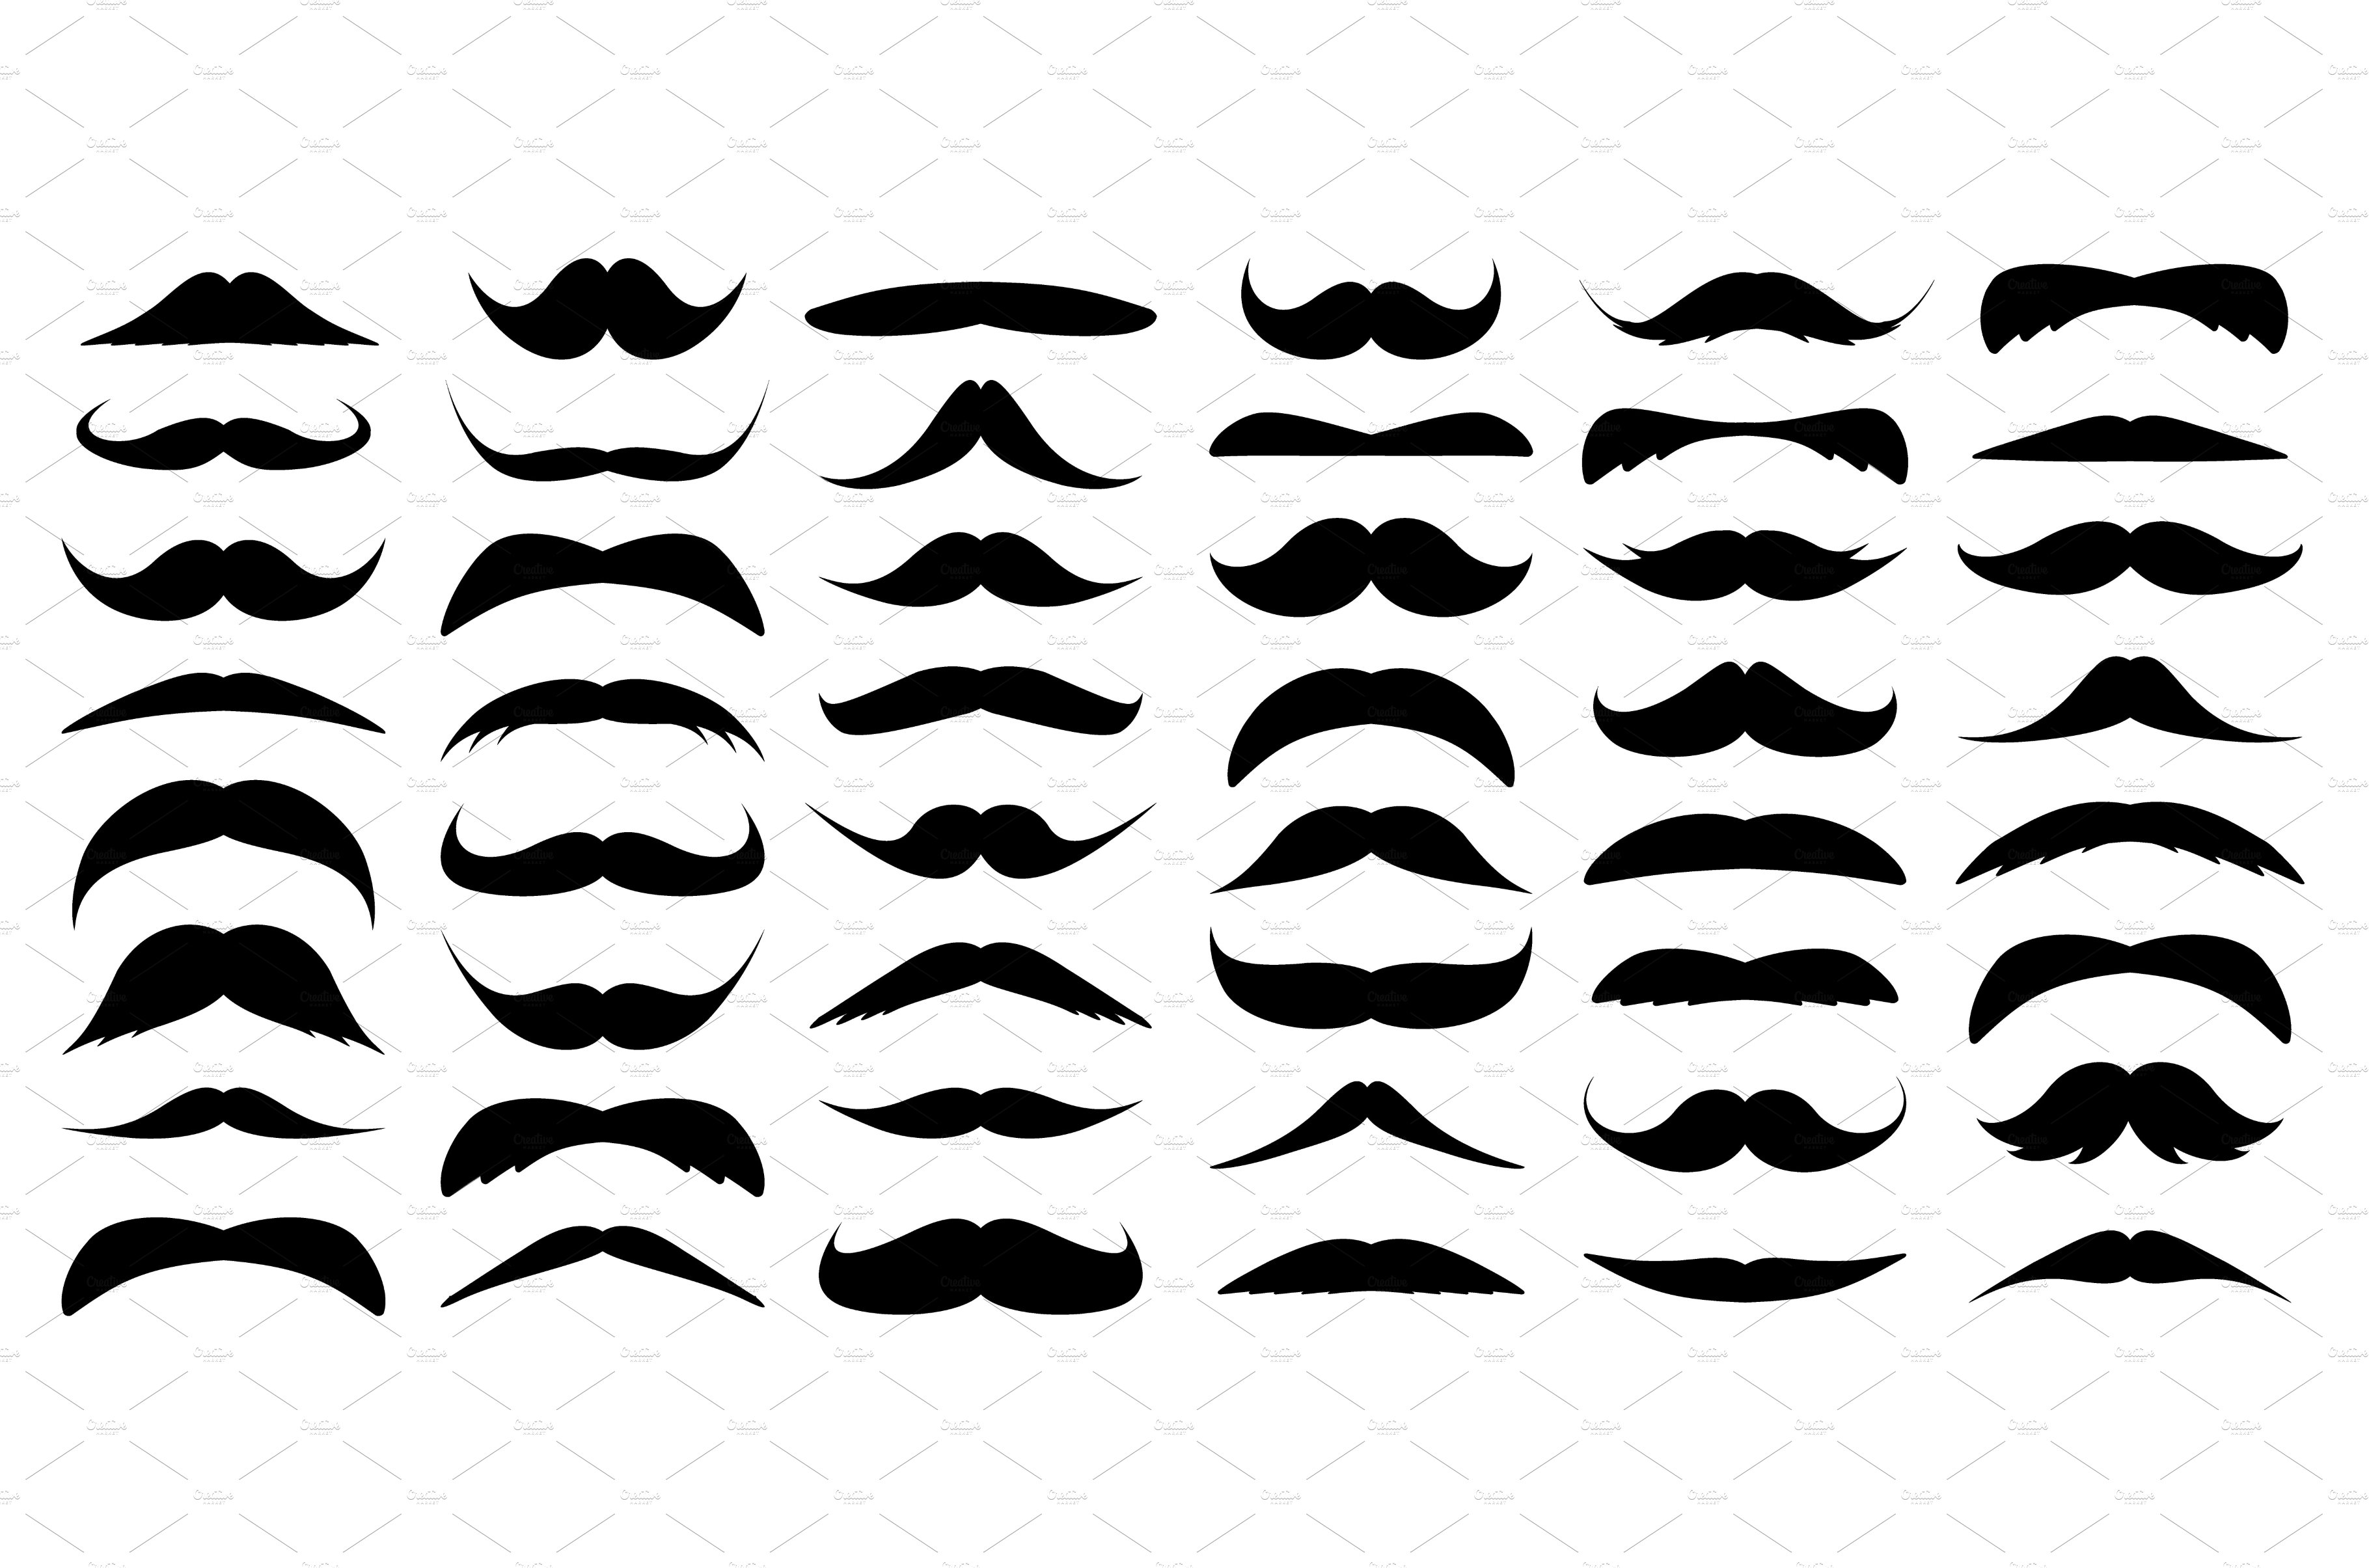 Mustache collection. Vintage cover image.